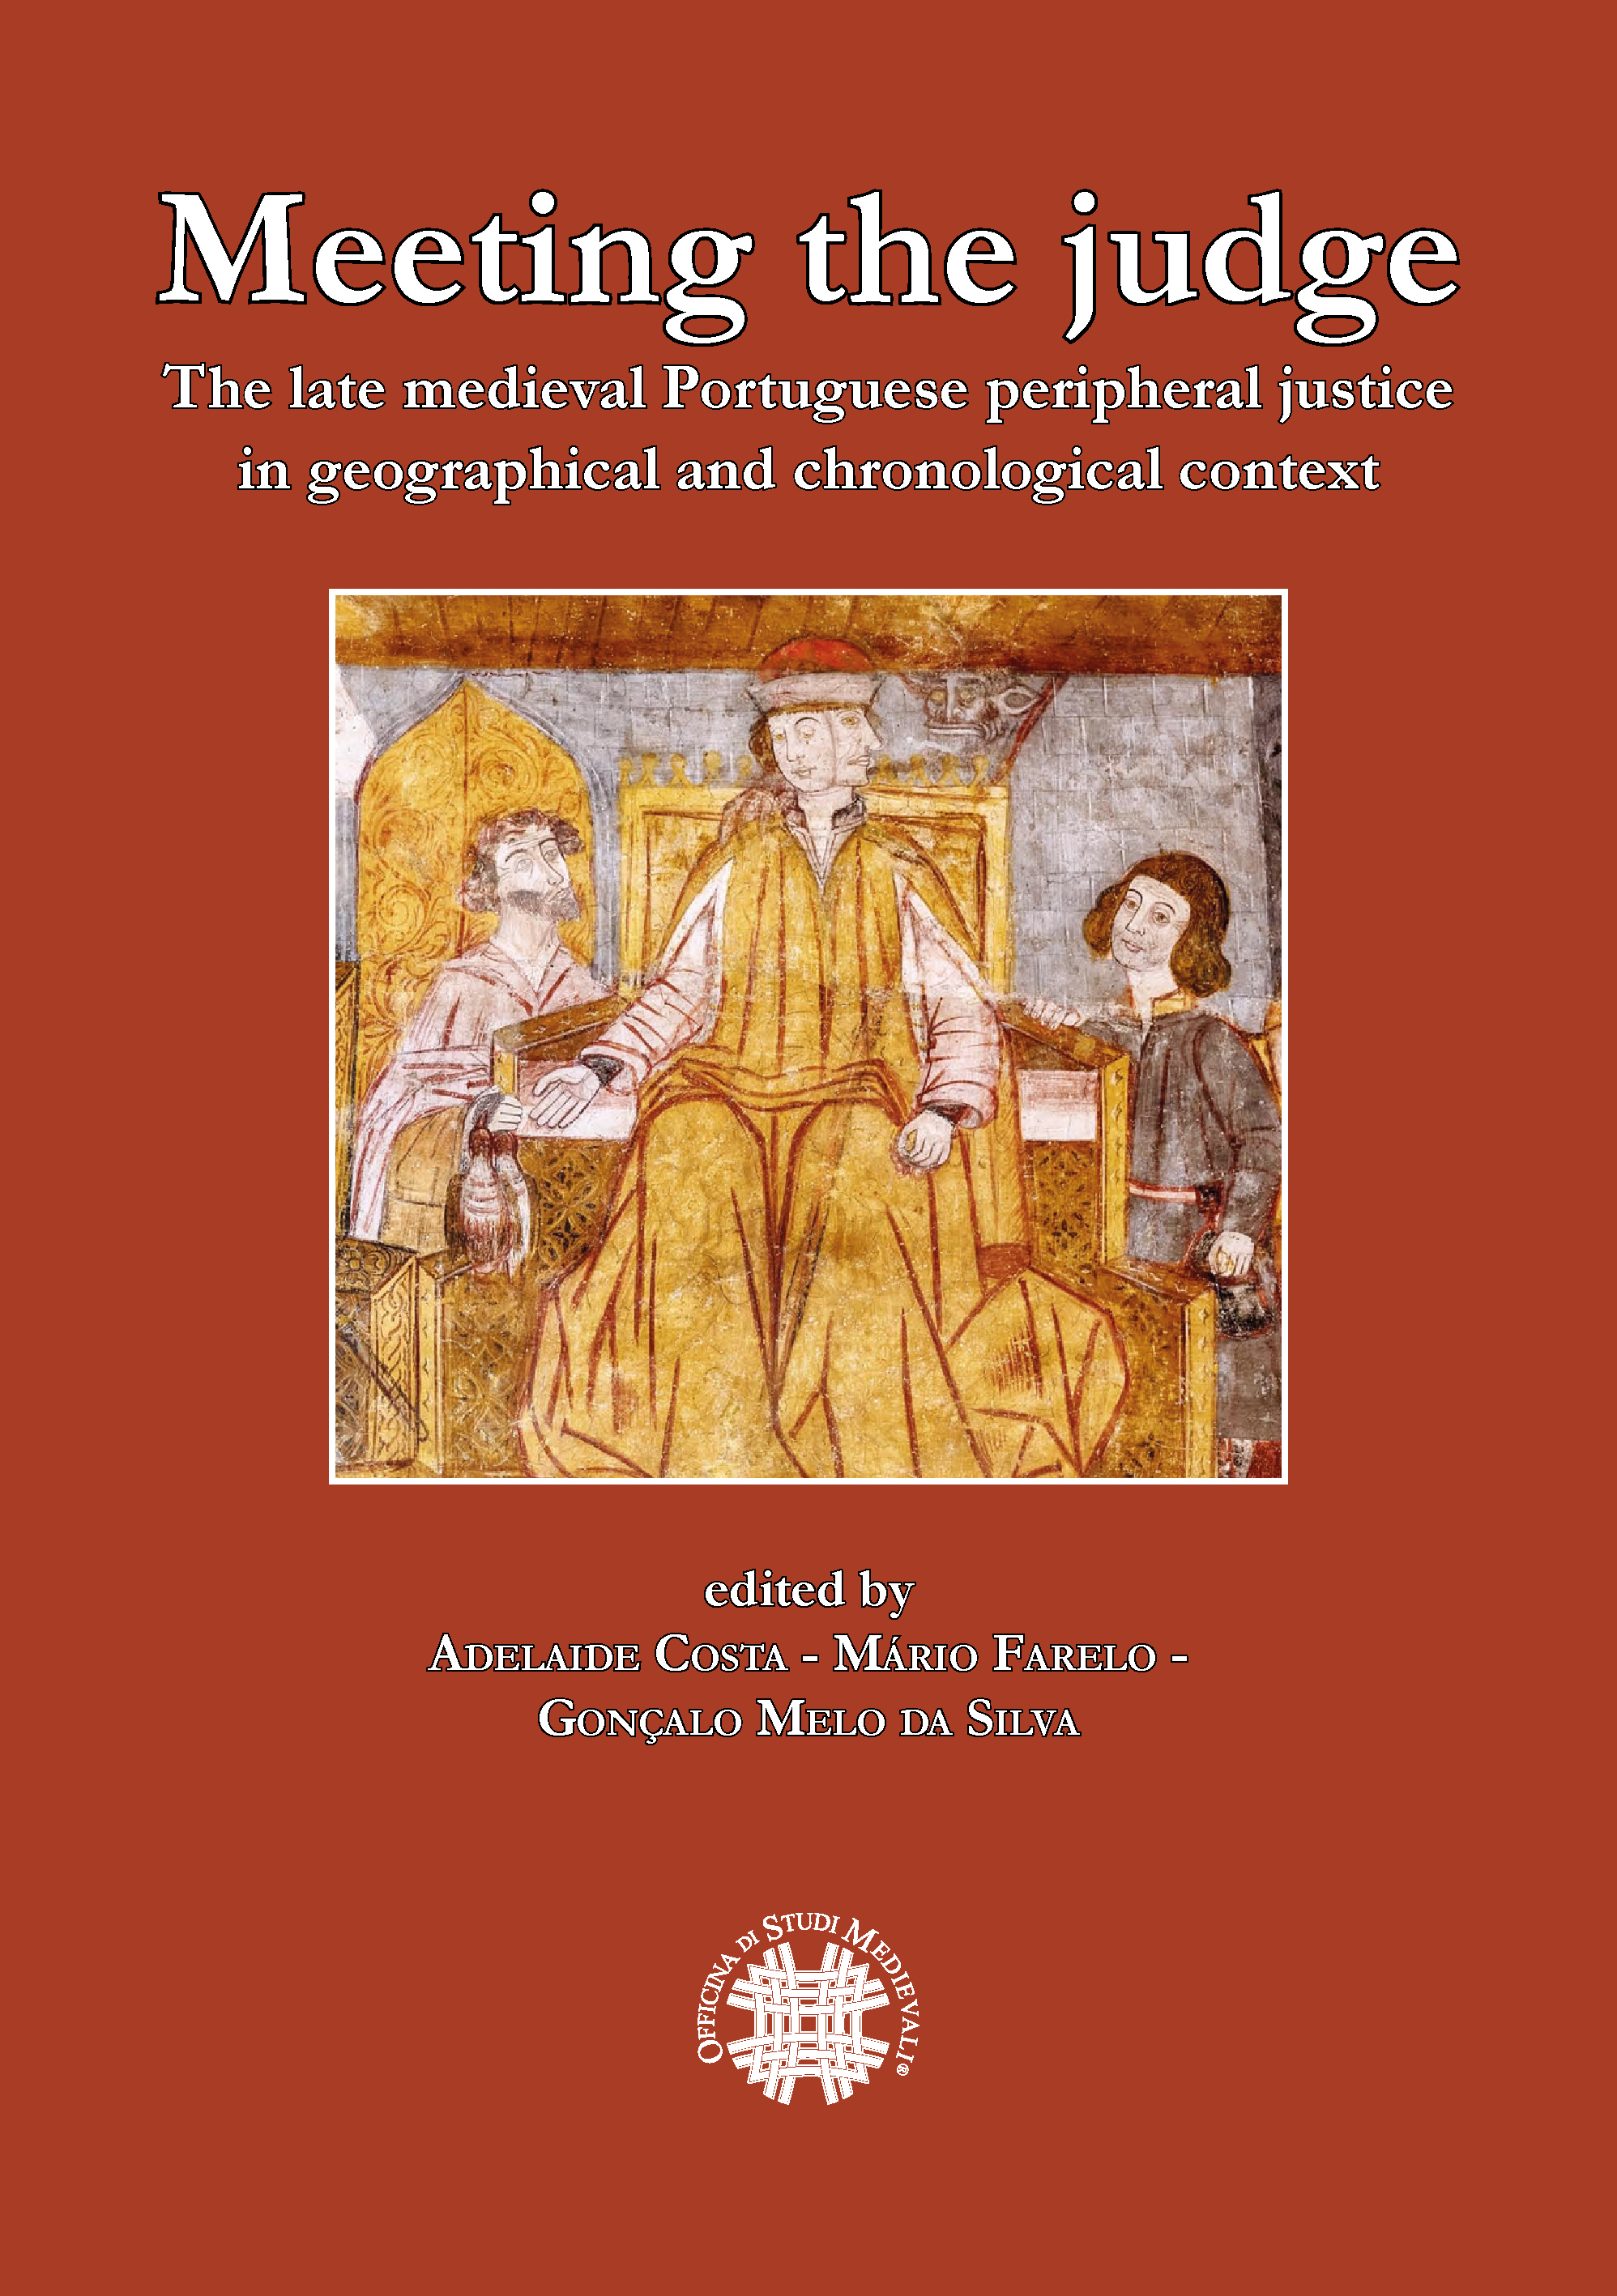 Capa da publicação Meeting the judge. The late medieval Portuguese peripheral justice in geographical and chronogical context